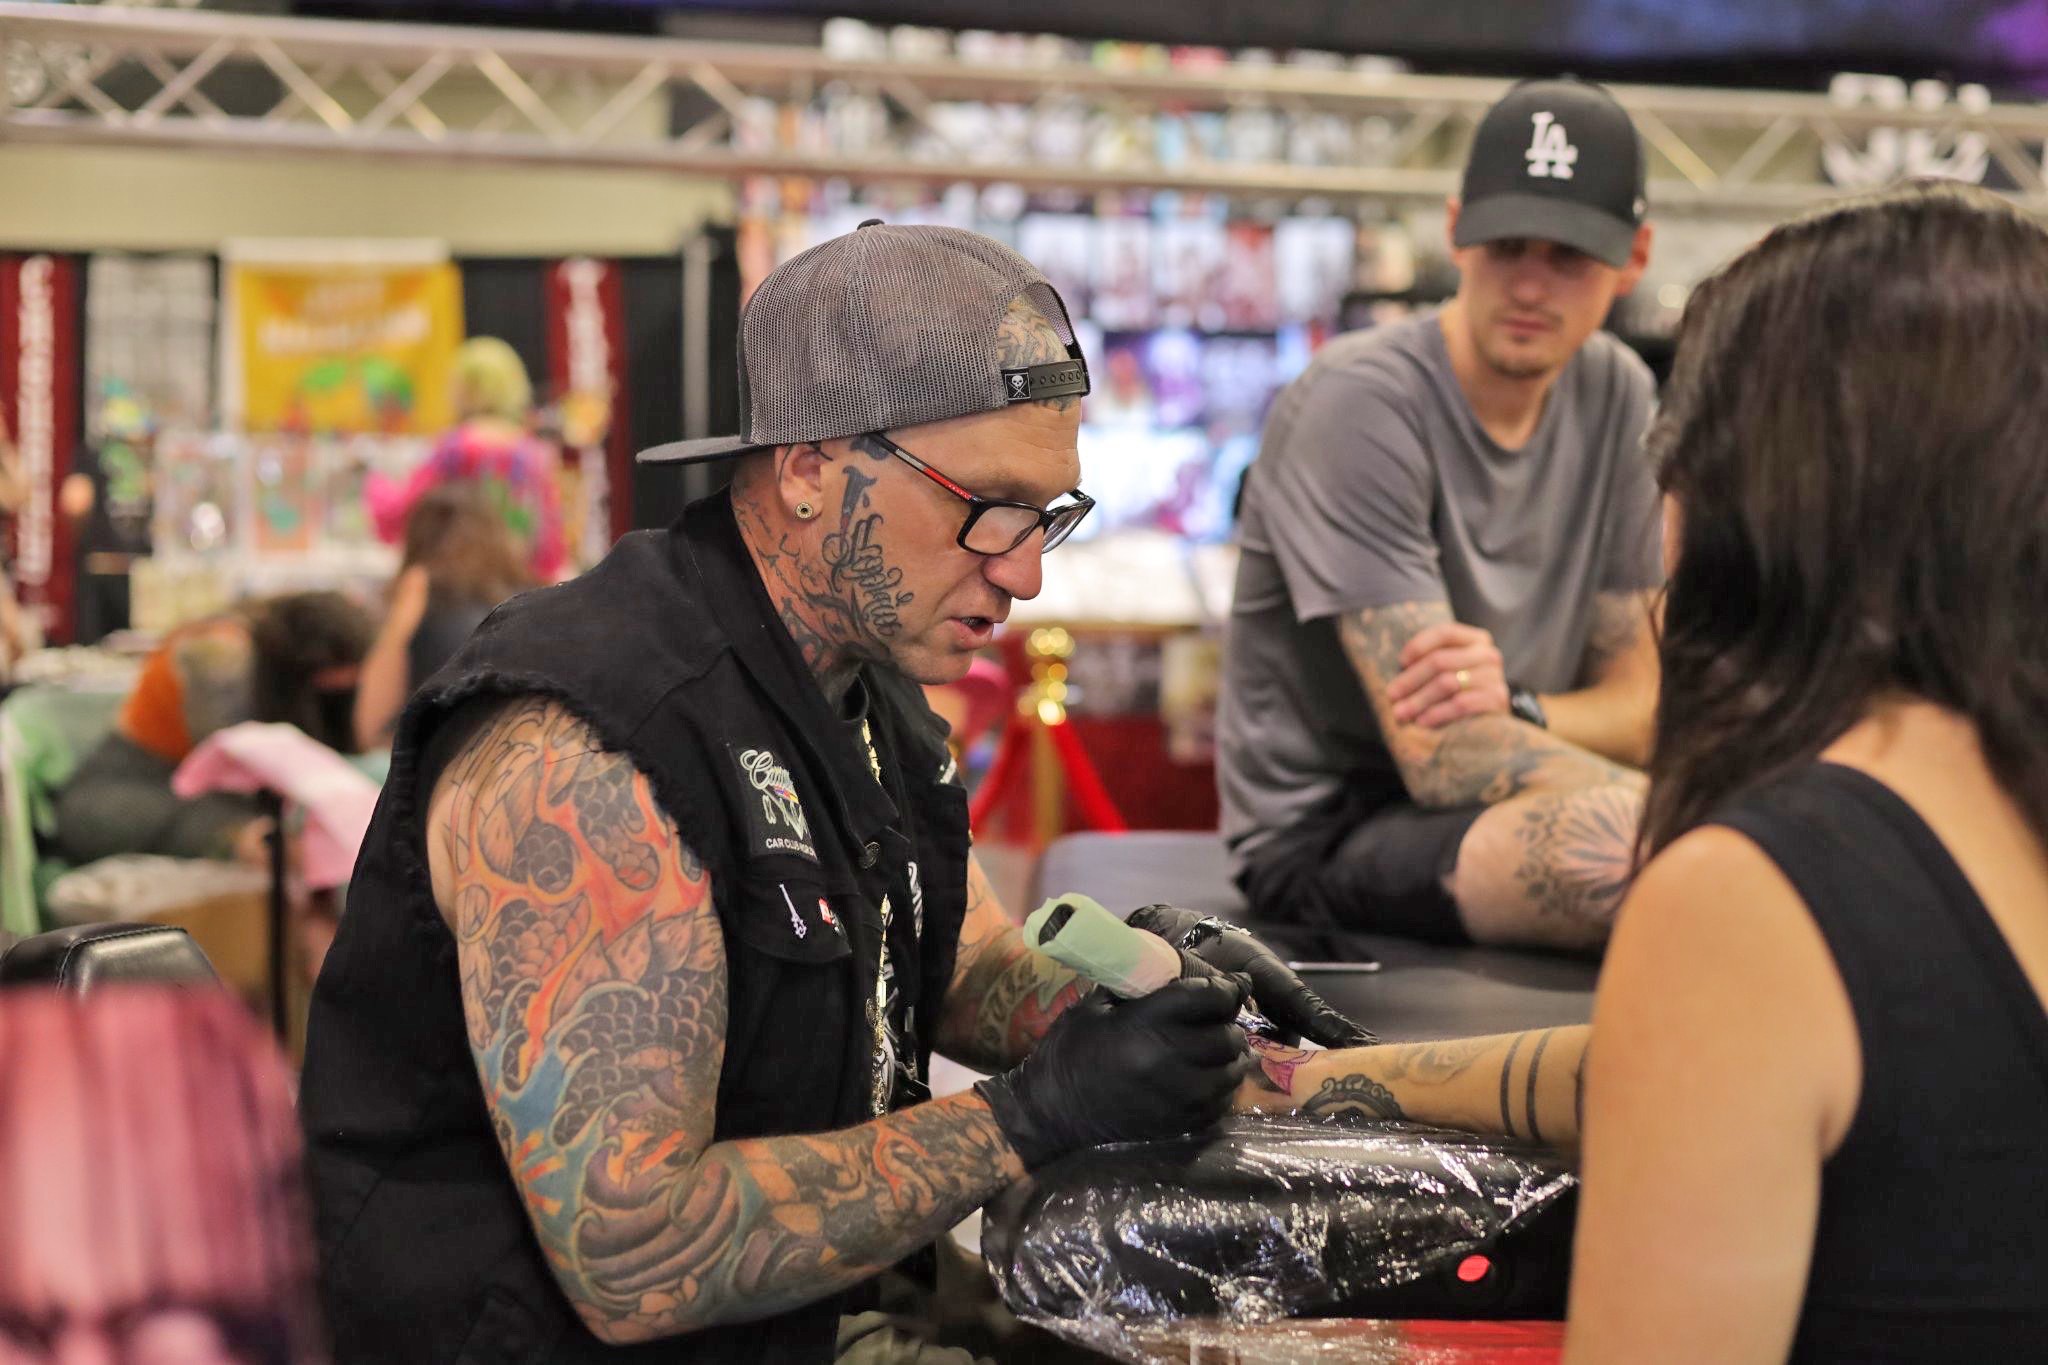 From left Lee Dreifort of Willowghby Ohio Larry Harp of Vancouver  Wash and Kai Kristensen of San Diego sit in the crowd displaying their  tattoos during the National Tattoo Convention in St